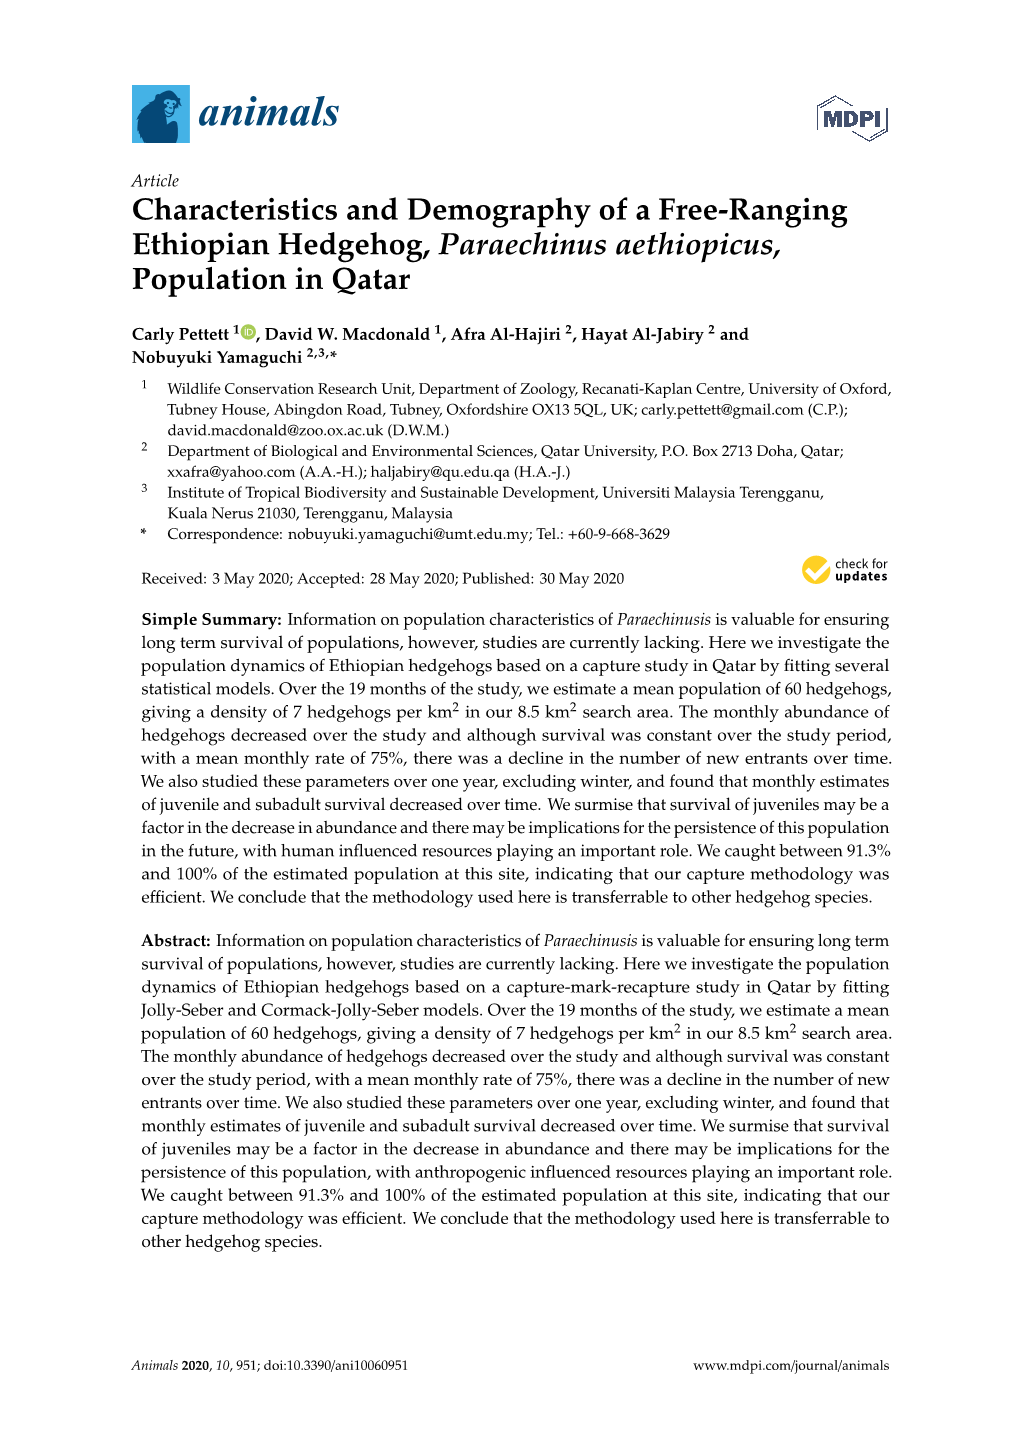 Characteristics and Demography of a Free-Ranging Ethiopian Hedgehog, Paraechinus Aethiopicus, Population in Qatar